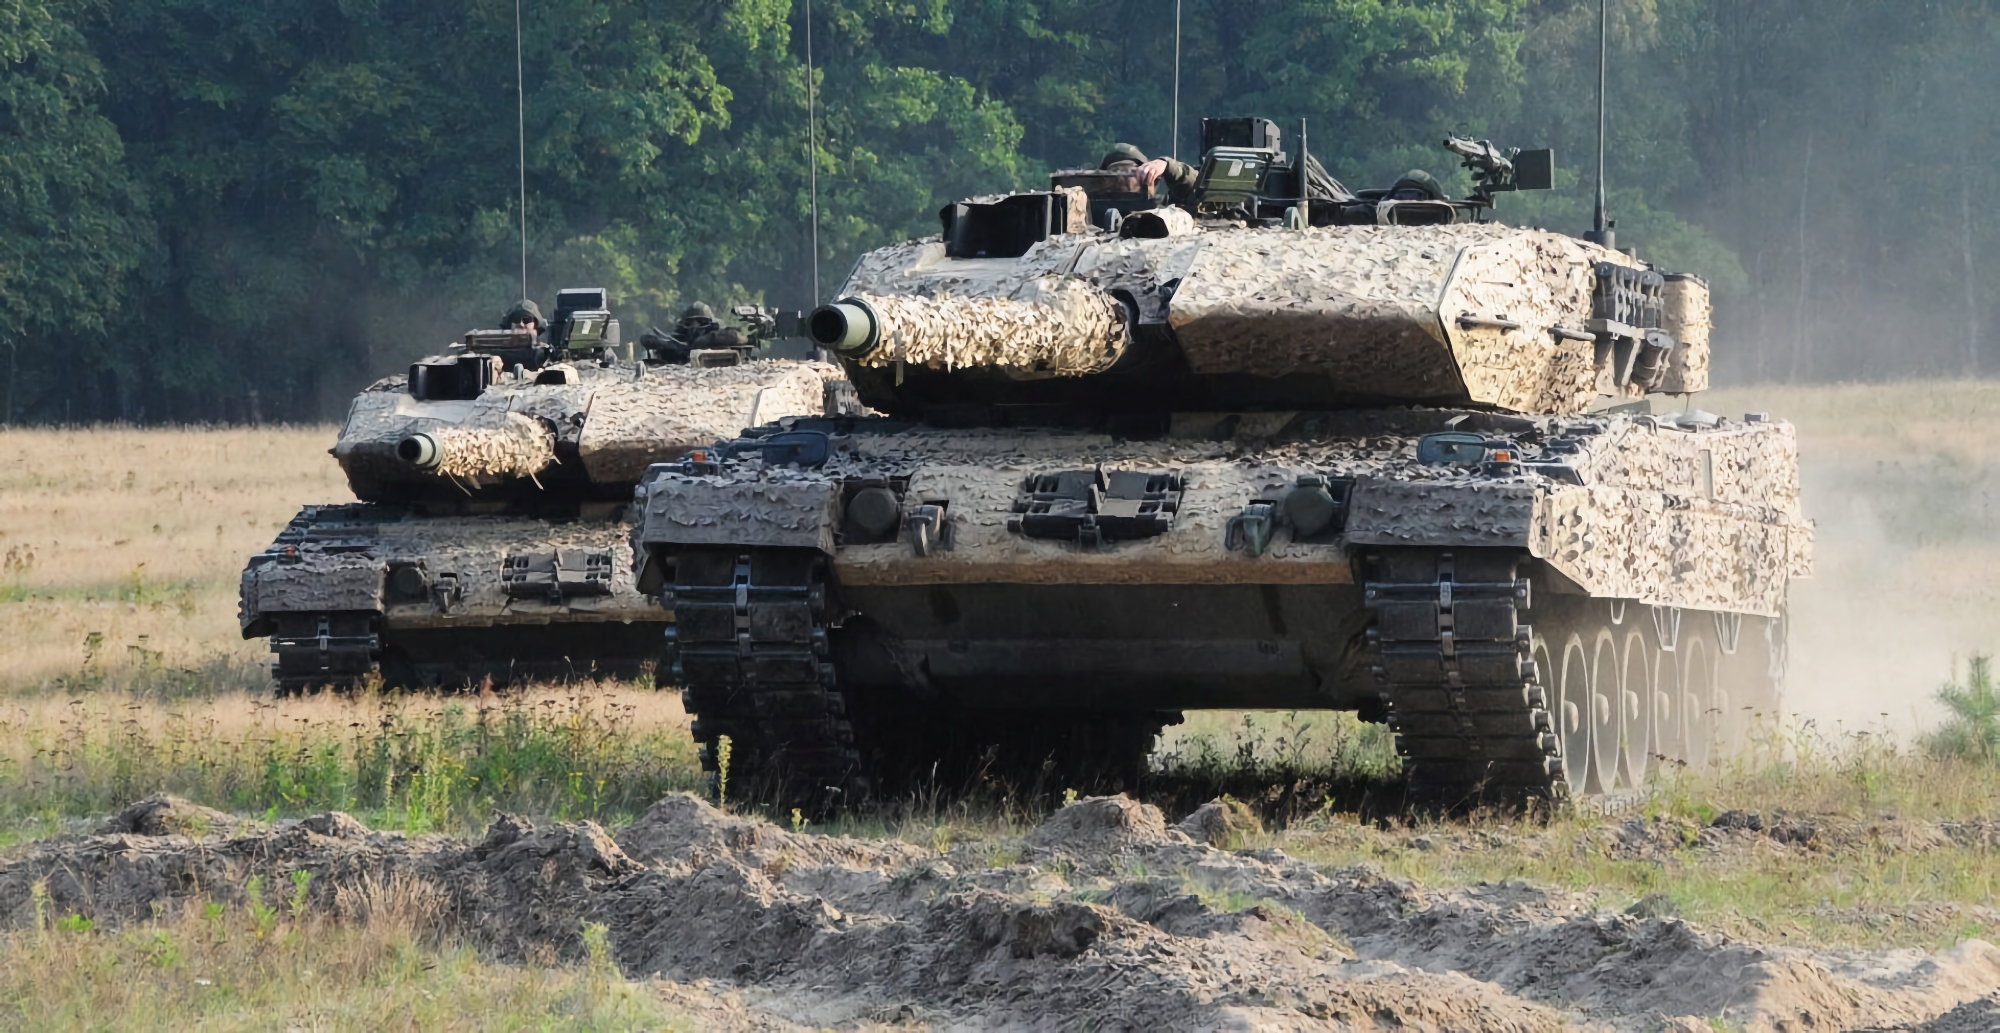 ABC News: 12 countries are ready to transfer 100 Leopard 2 tanks to Ukraine as soon as Germany gives permission for deliveries